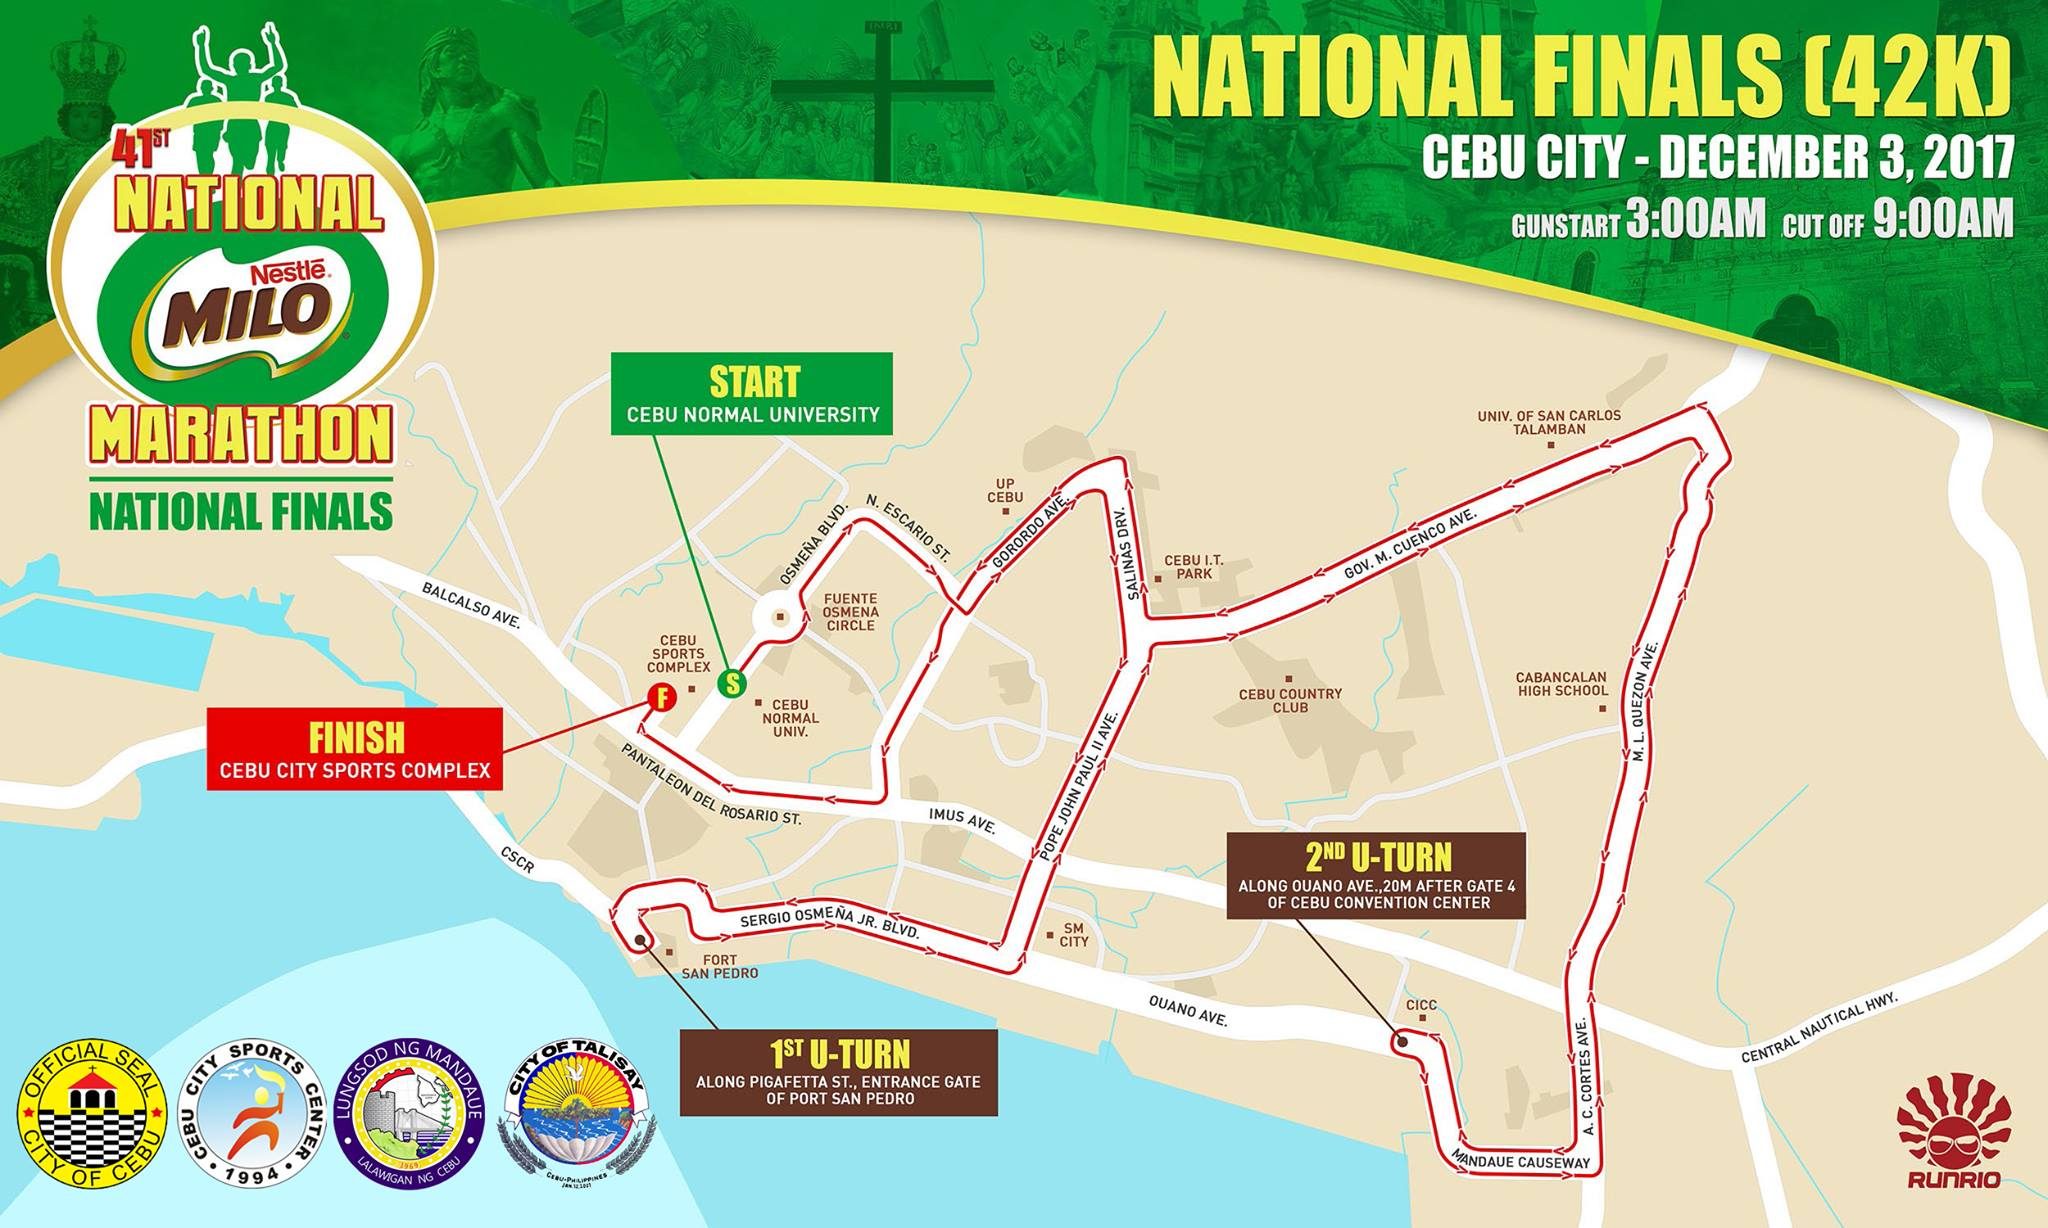 Tabal aims for record 5th Milo Marathon queen title